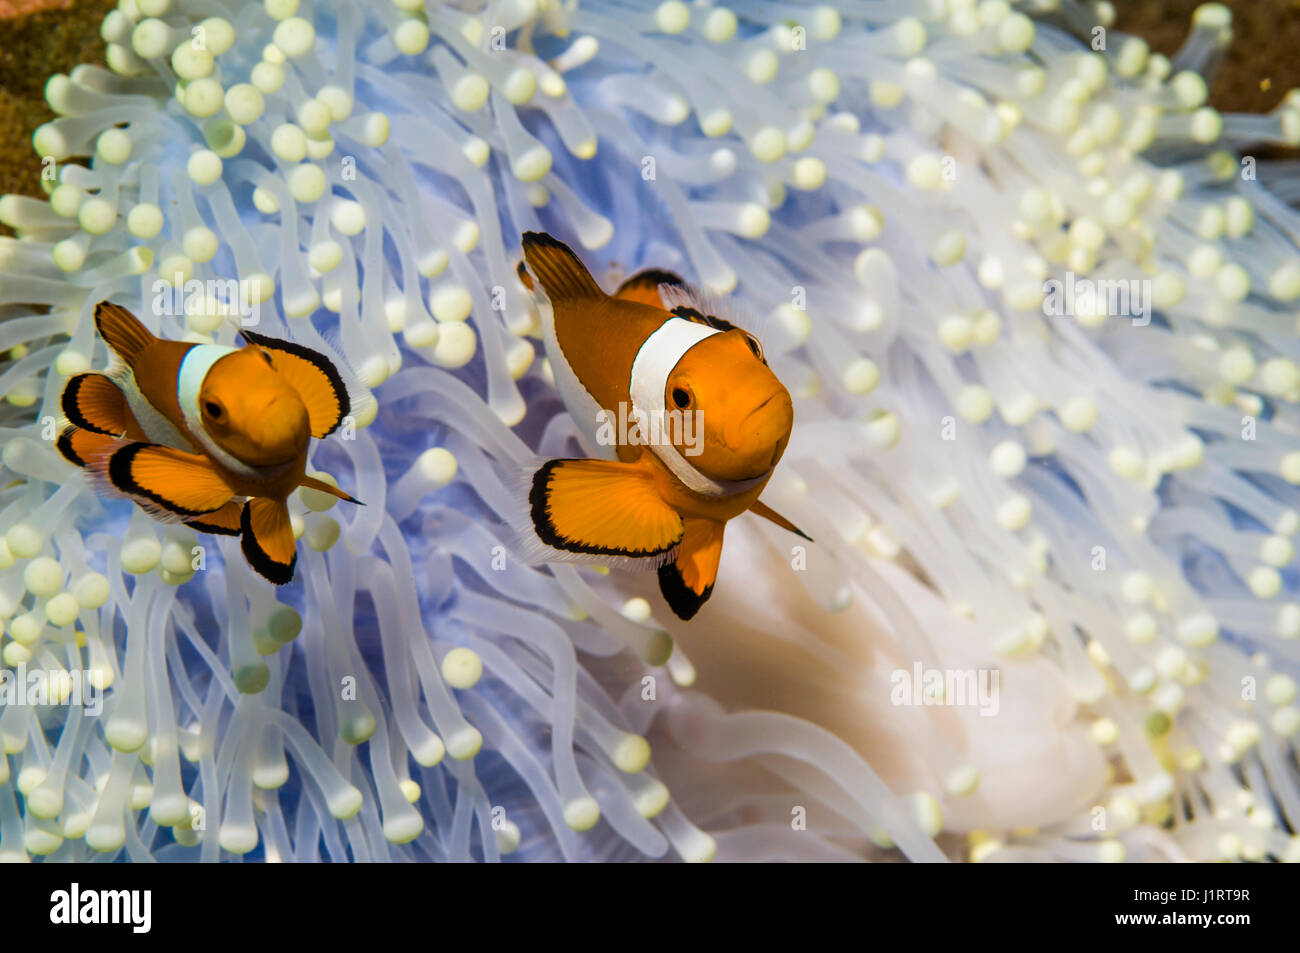 False clown anemonefish [Amphiprion percola] in bleached anemone.  Bunaken National Park, North Sulawesi, Indonesia. Stock Photo